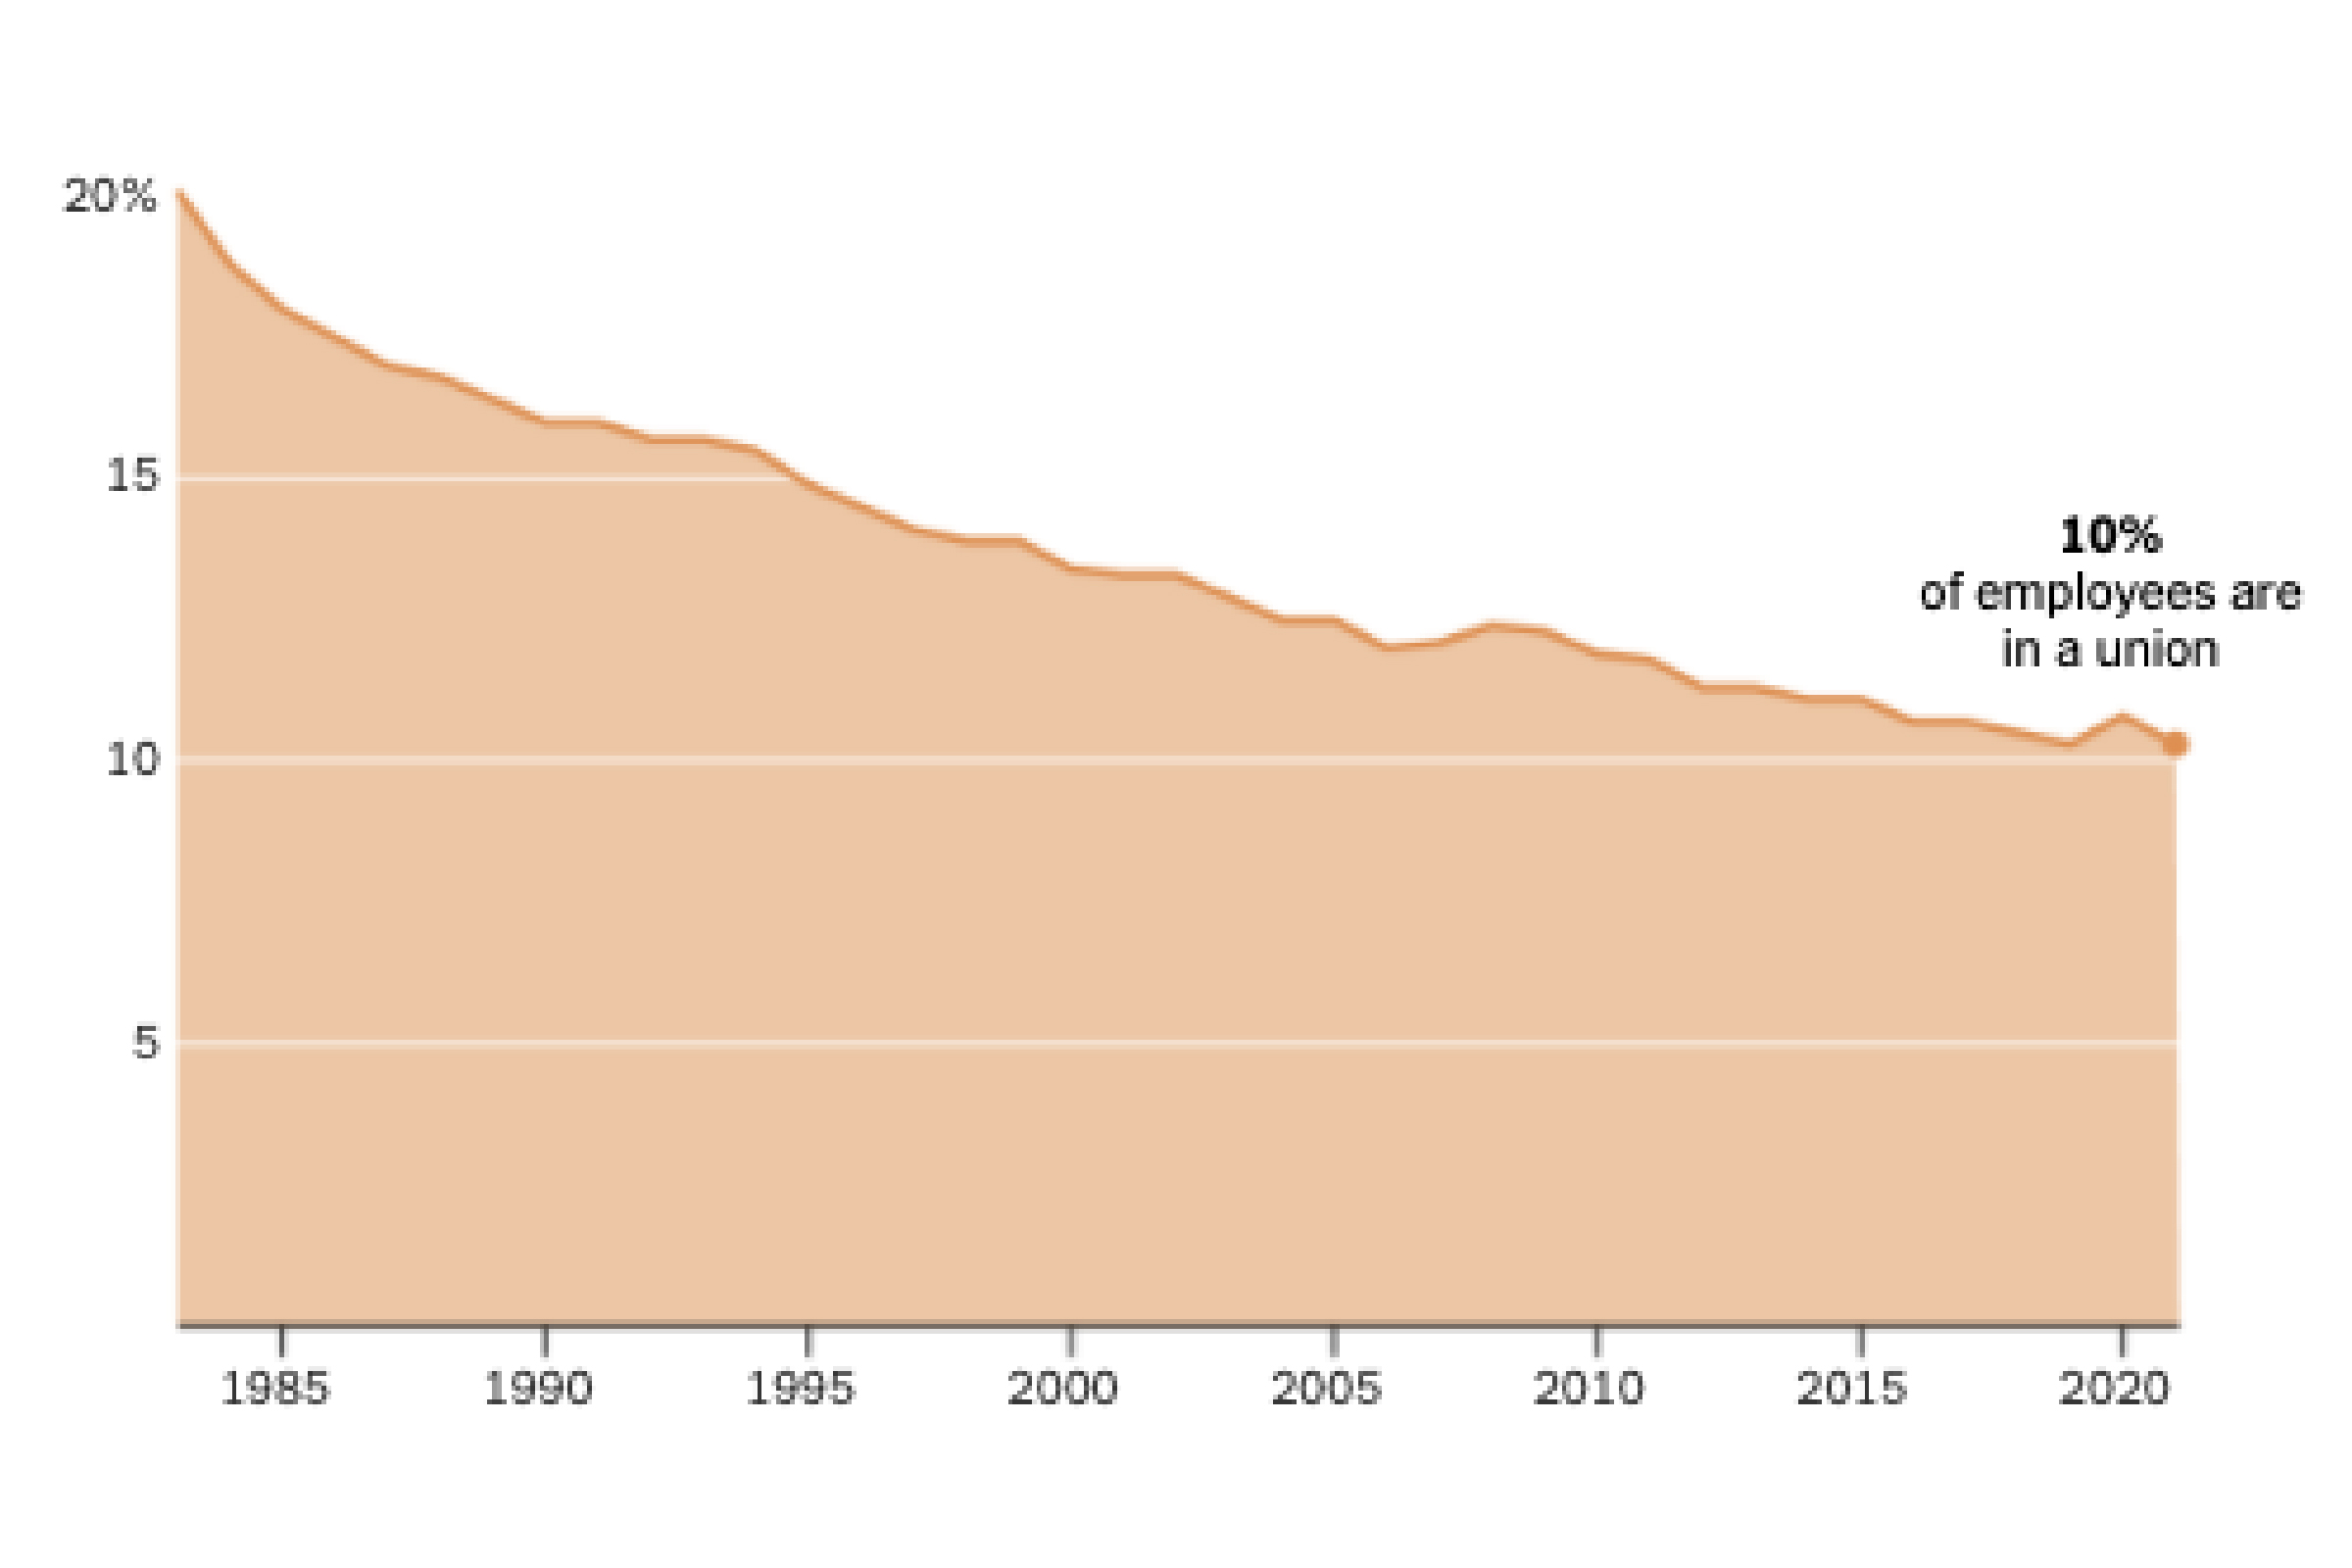 Line chart showing percent of employees who are in a union in the U.S.